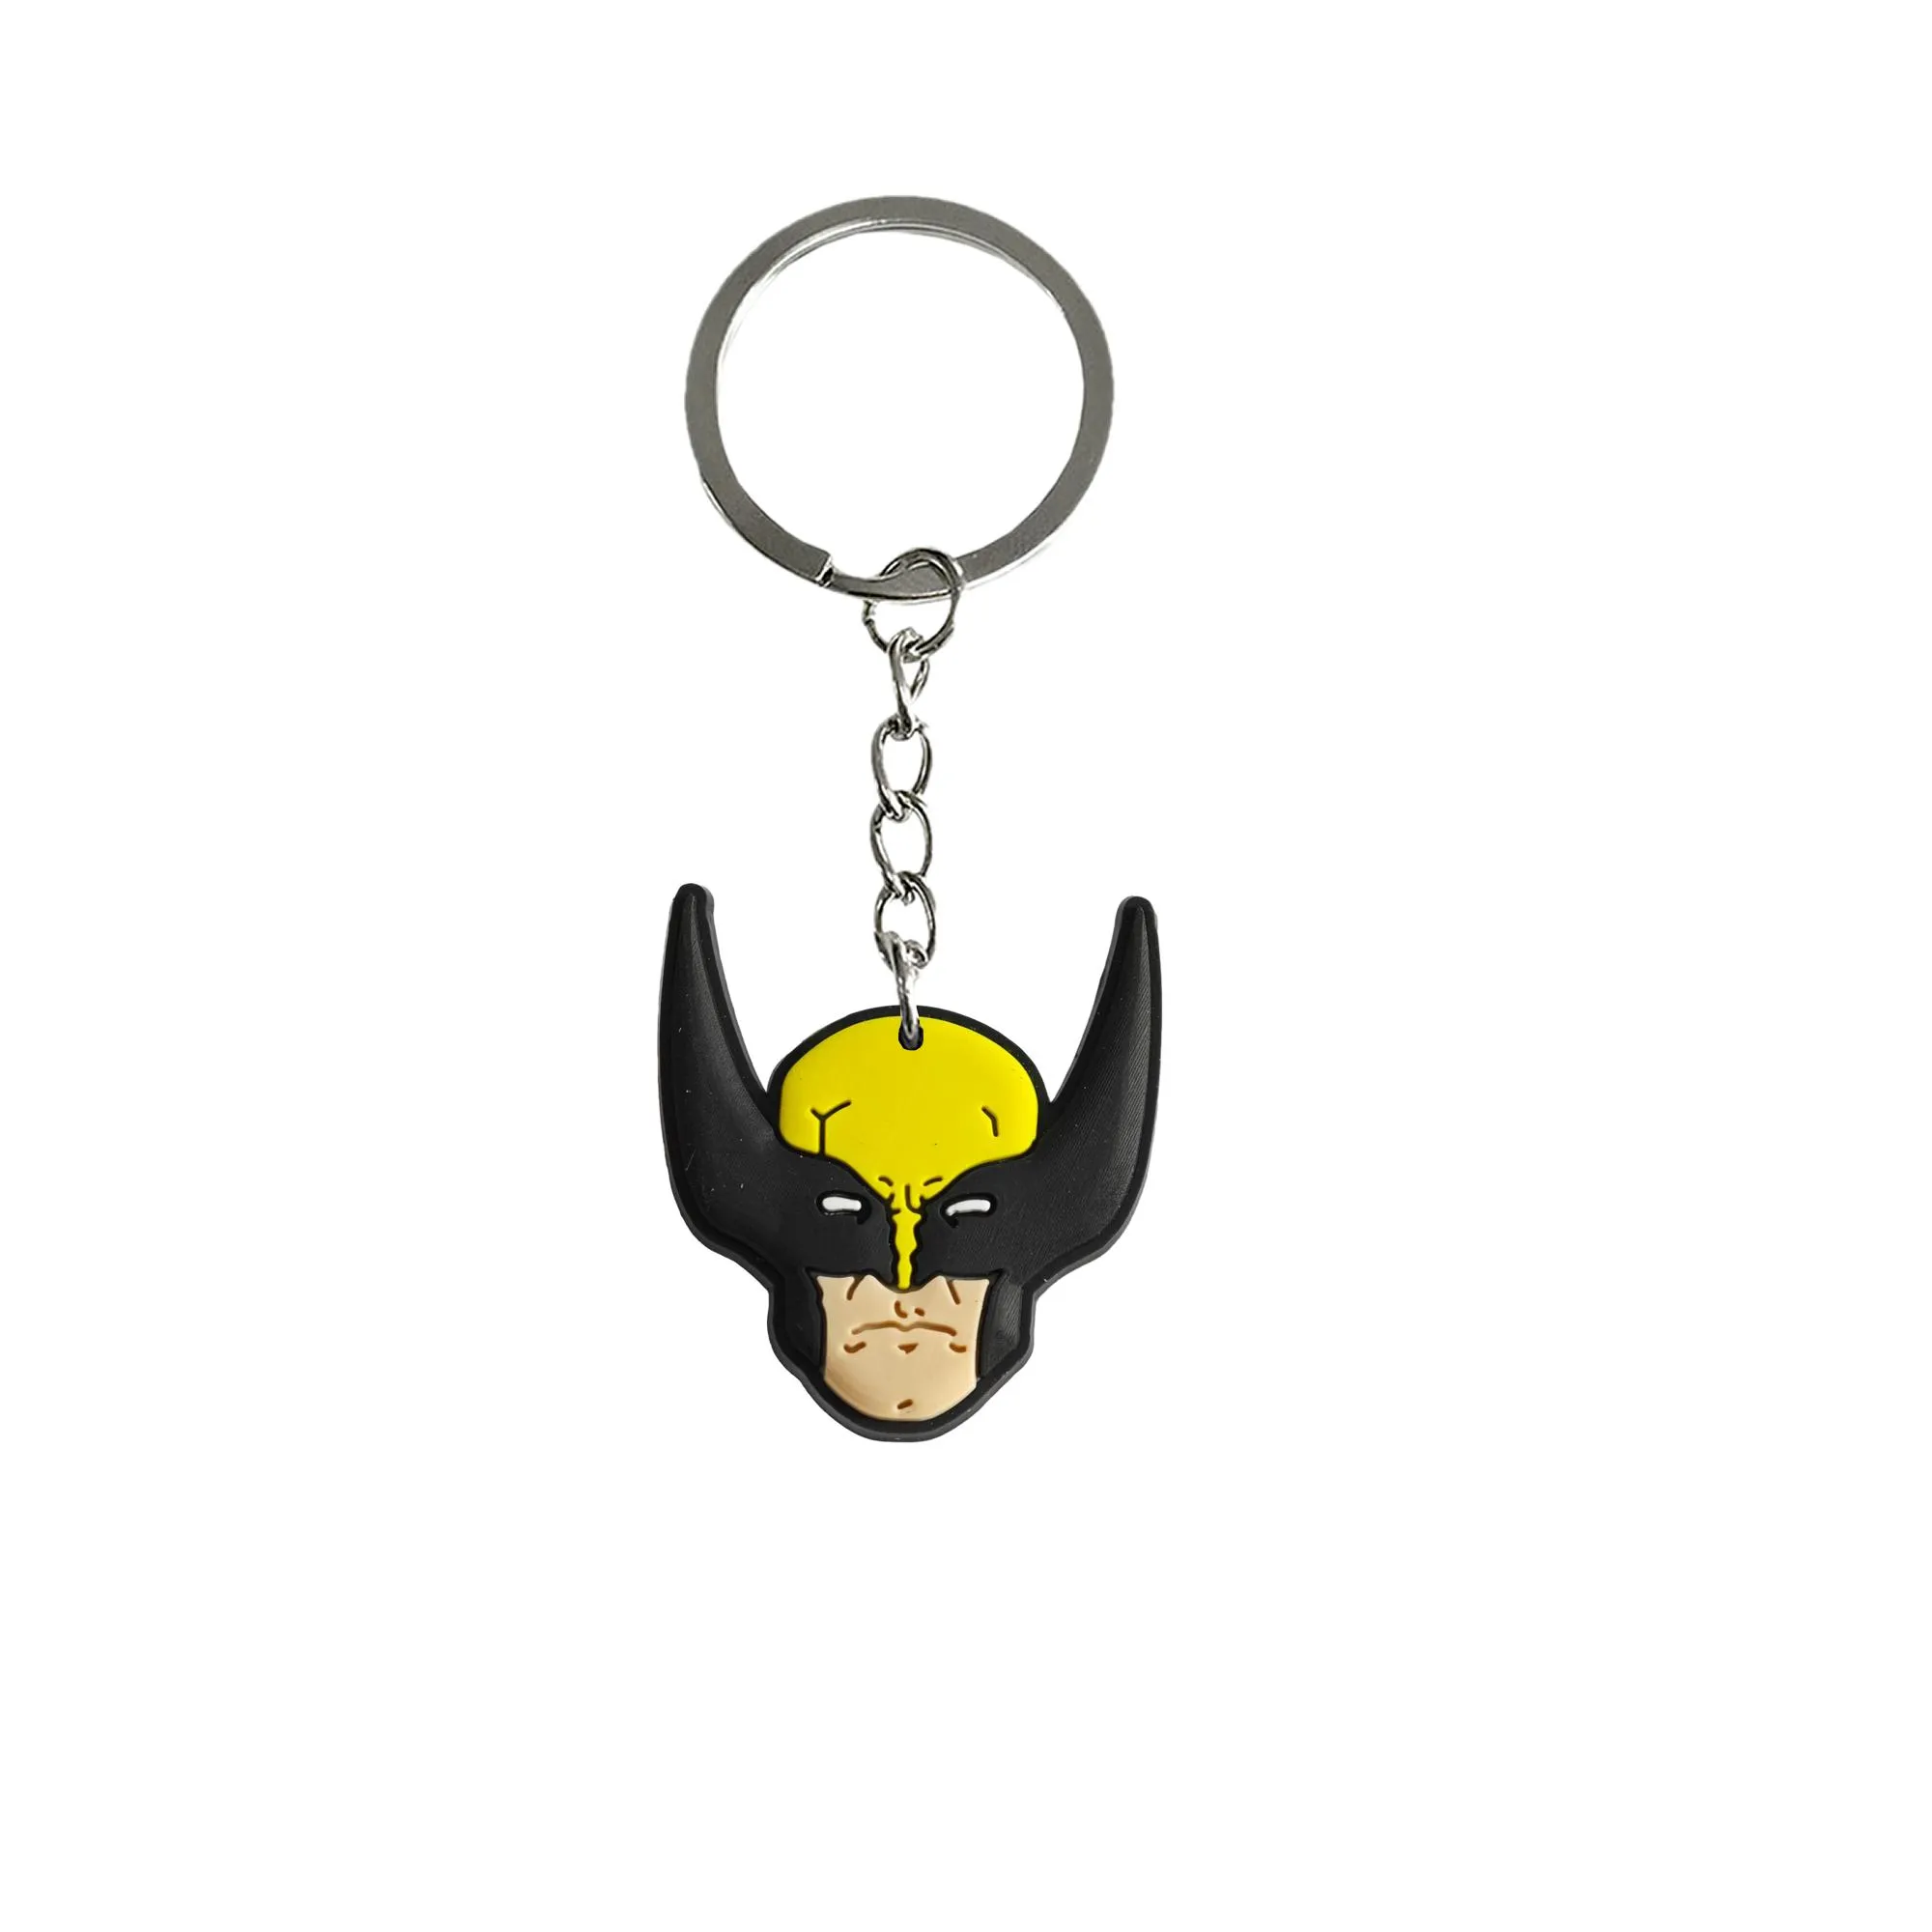 batman keychain goodie bag stuffers supplies keychains backpack couple key chains for women keyring suitable schoolbag anime cool backpacks school day birthday party gift